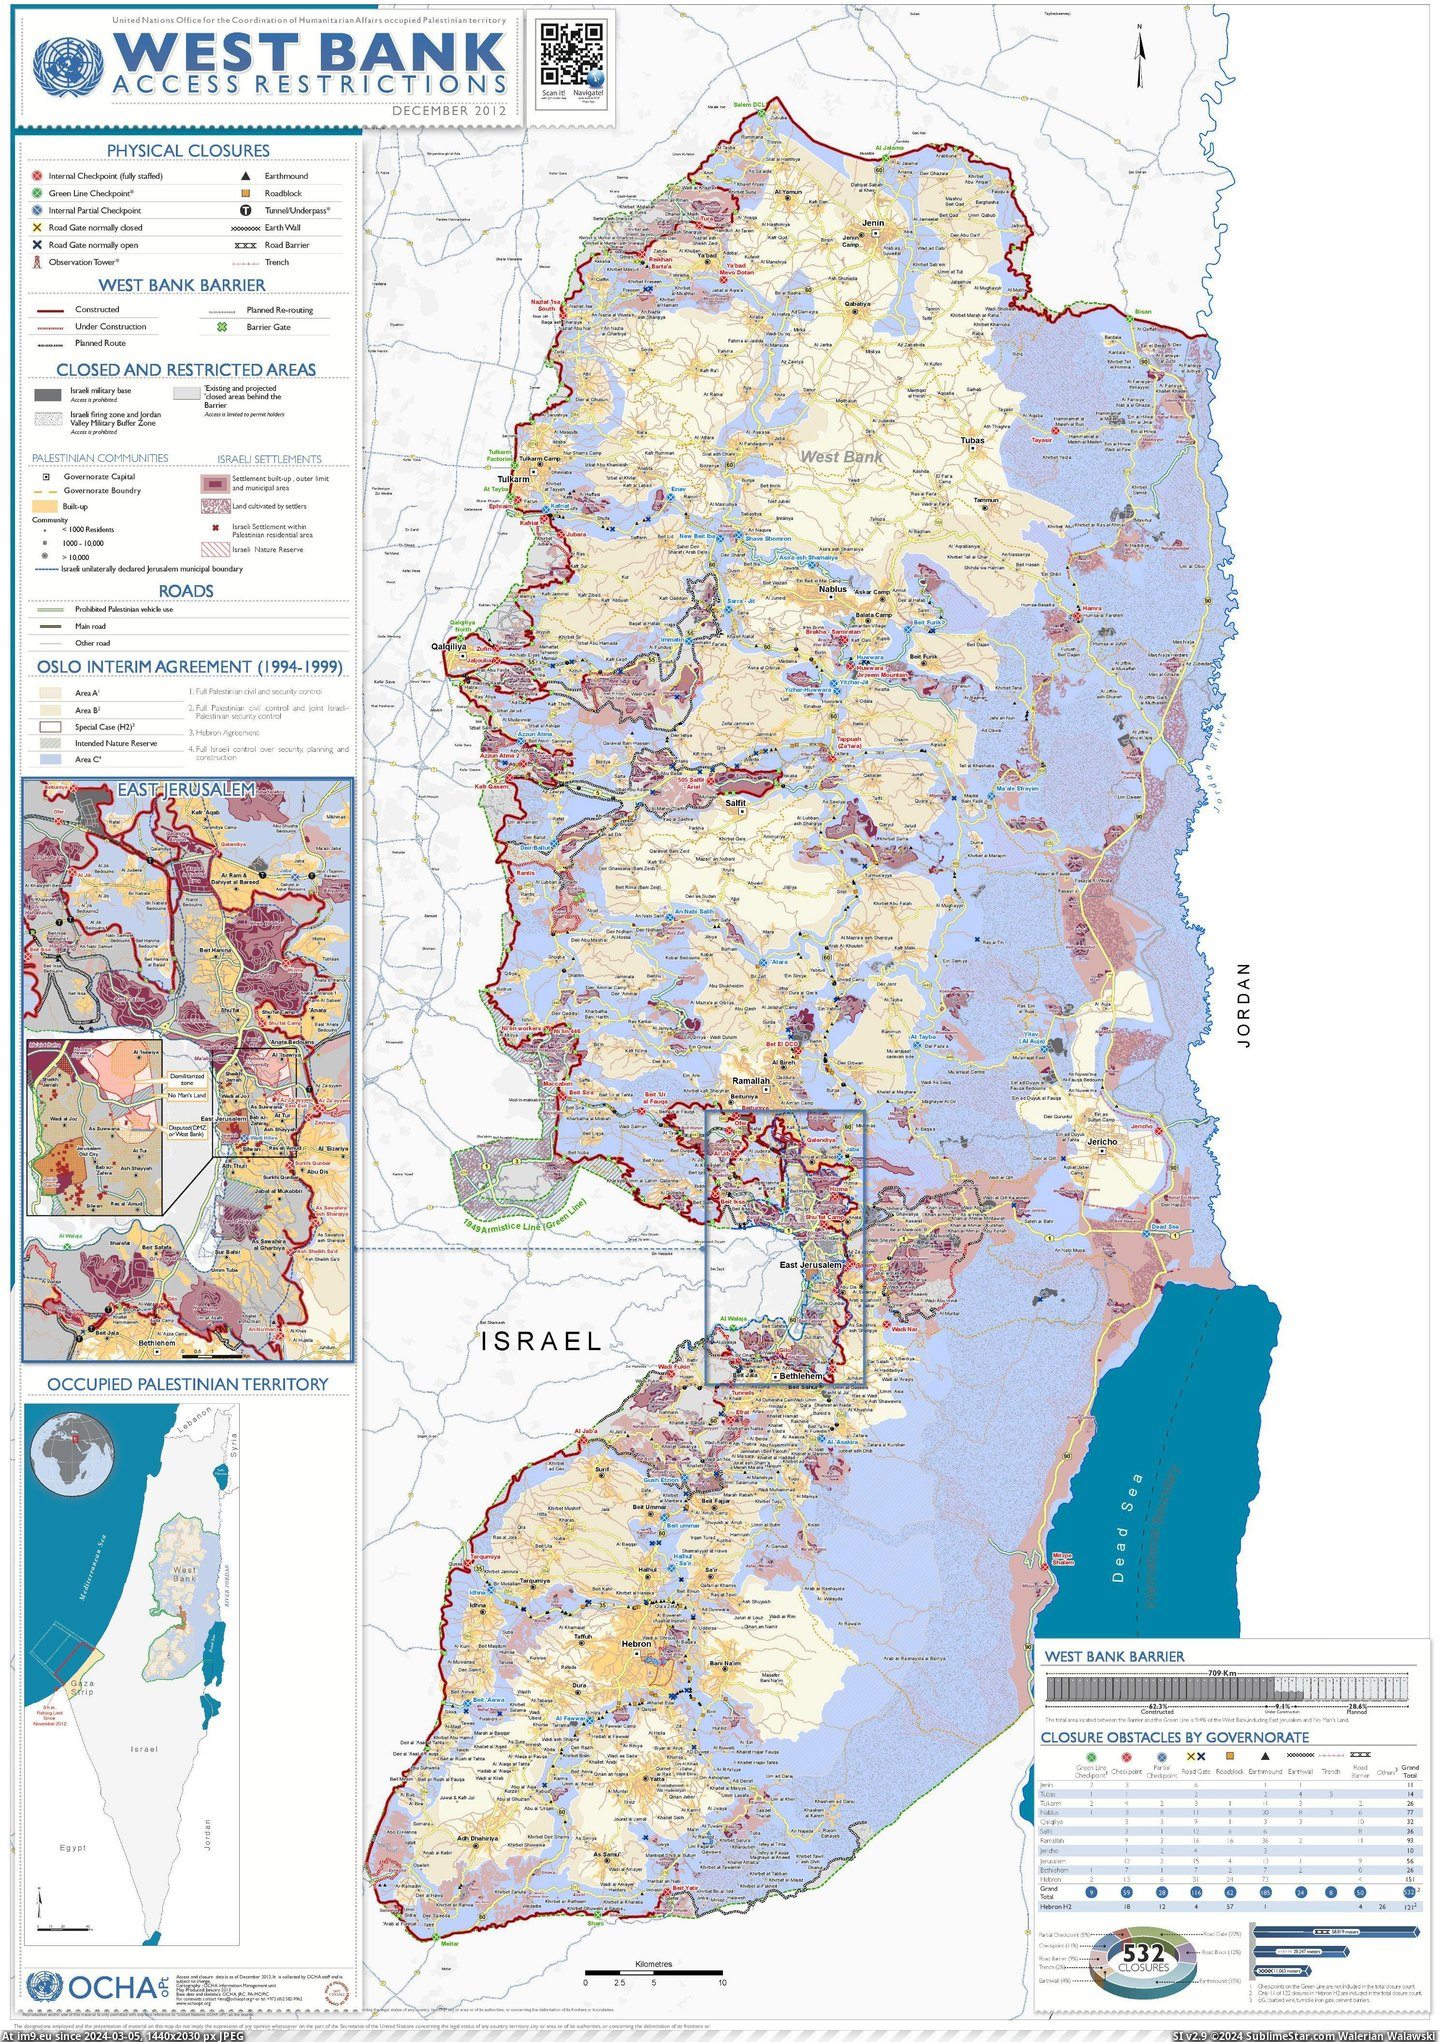 #West #Bank #Restrictions #Access [Mapporn] West Bank Access Restrictions (December 2012) [4967x7022] Pic. (Image of album My r/MAPS favs))